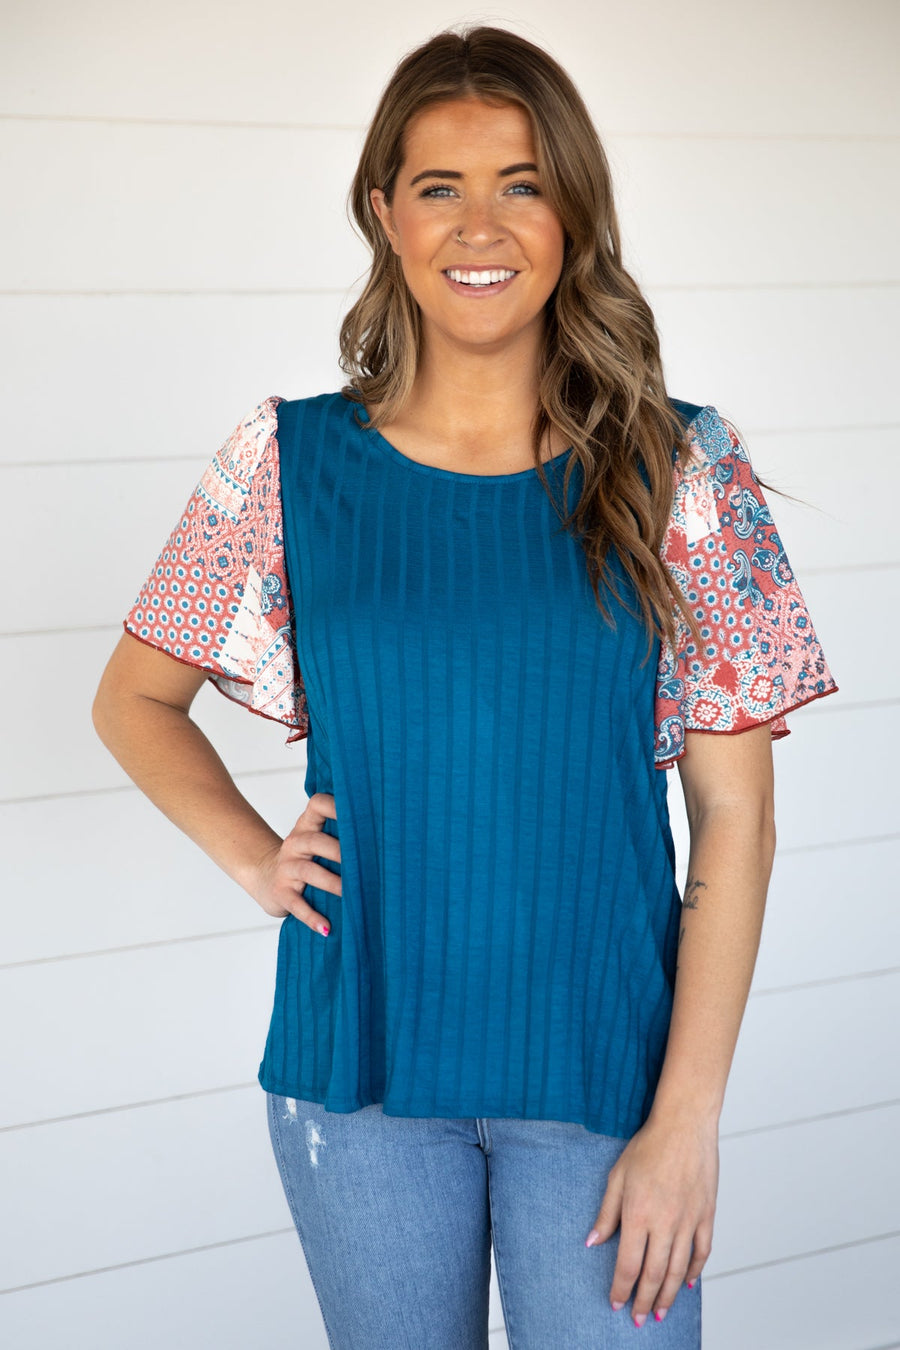 Teal Multicolor Boho Printed Sleeve Top - Filly Flair